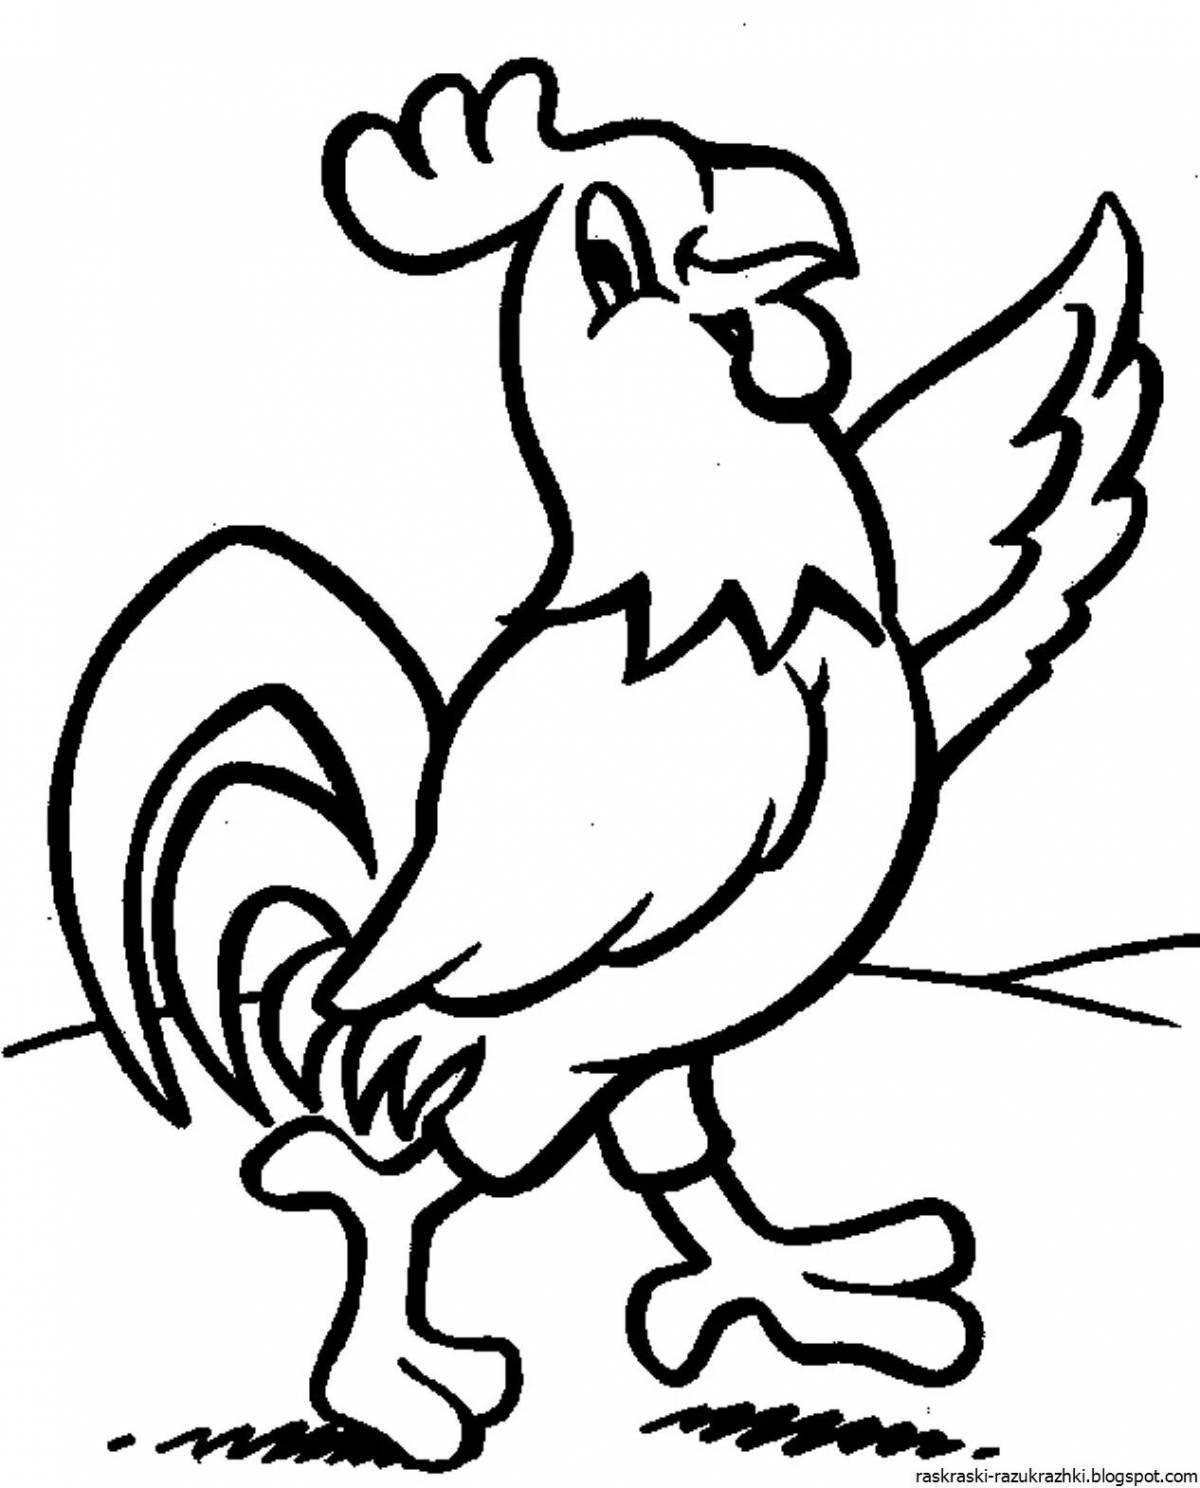 Animated rooster coloring page